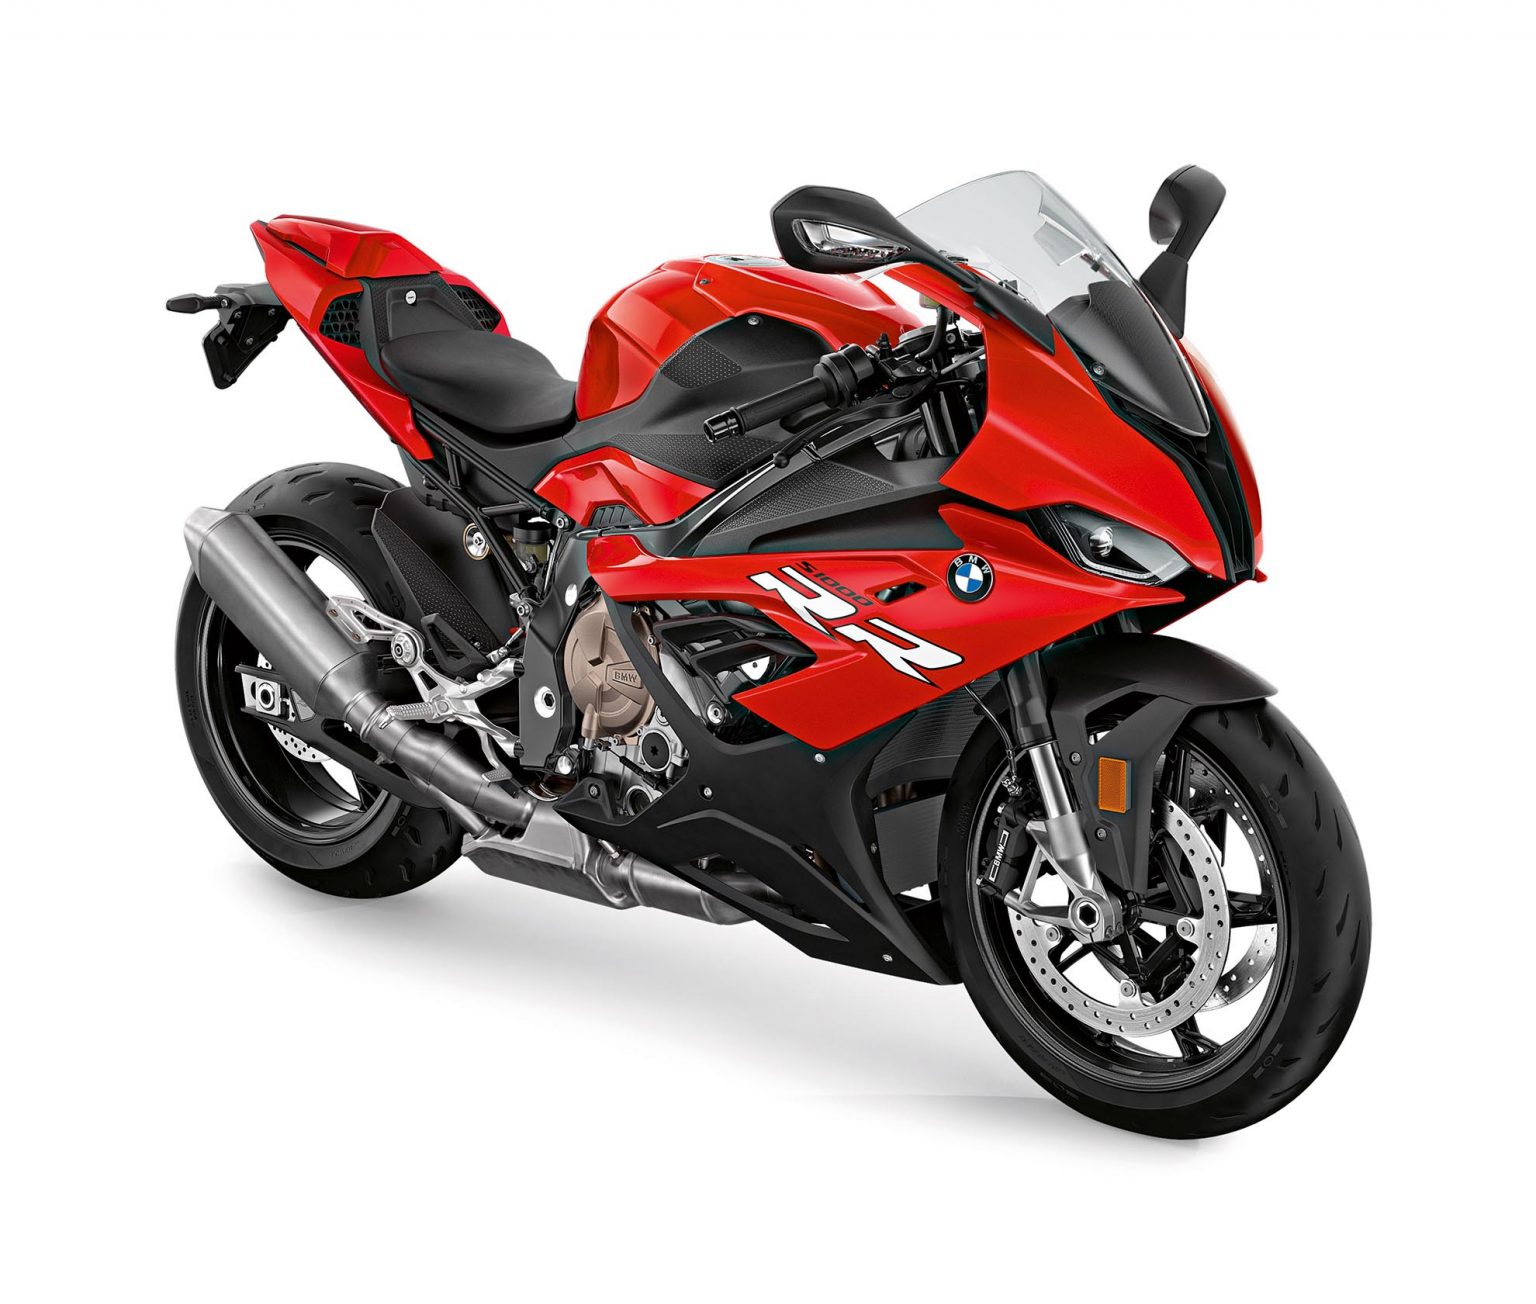 3. The New BMW S 1000 RR in Racing Red